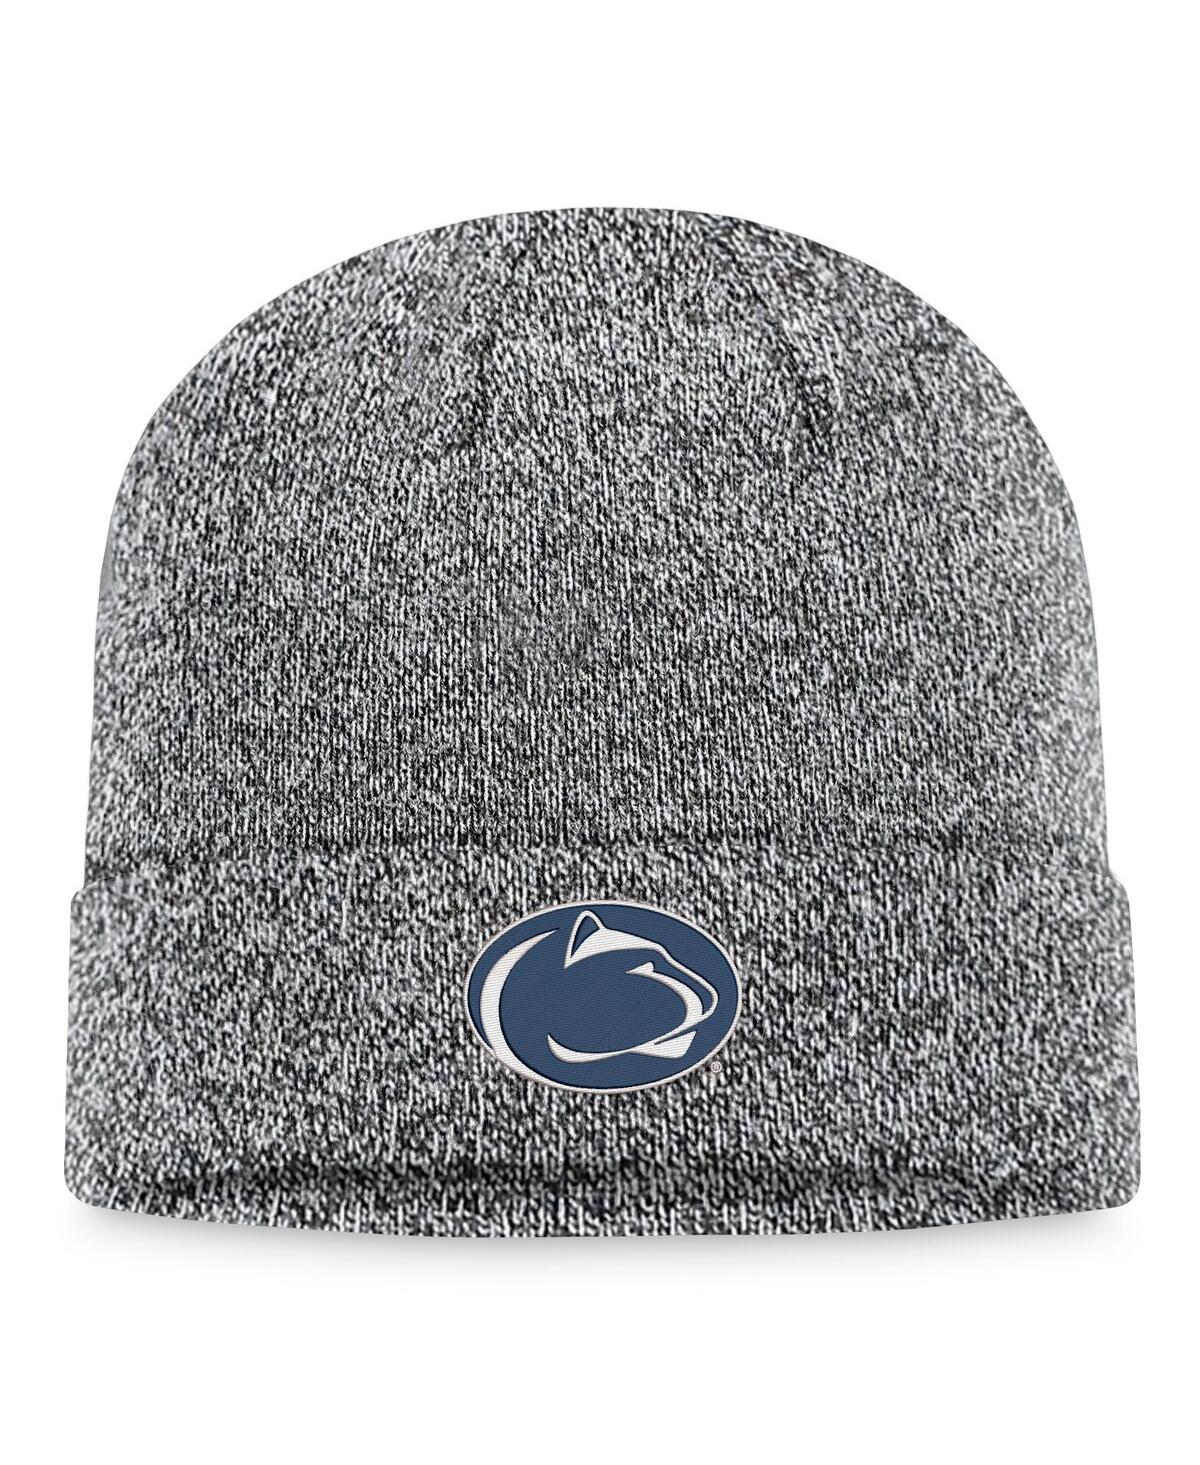 Top Of The World Men's  Heather Black Penn State Nittany Lions Cuffed Knit Hat